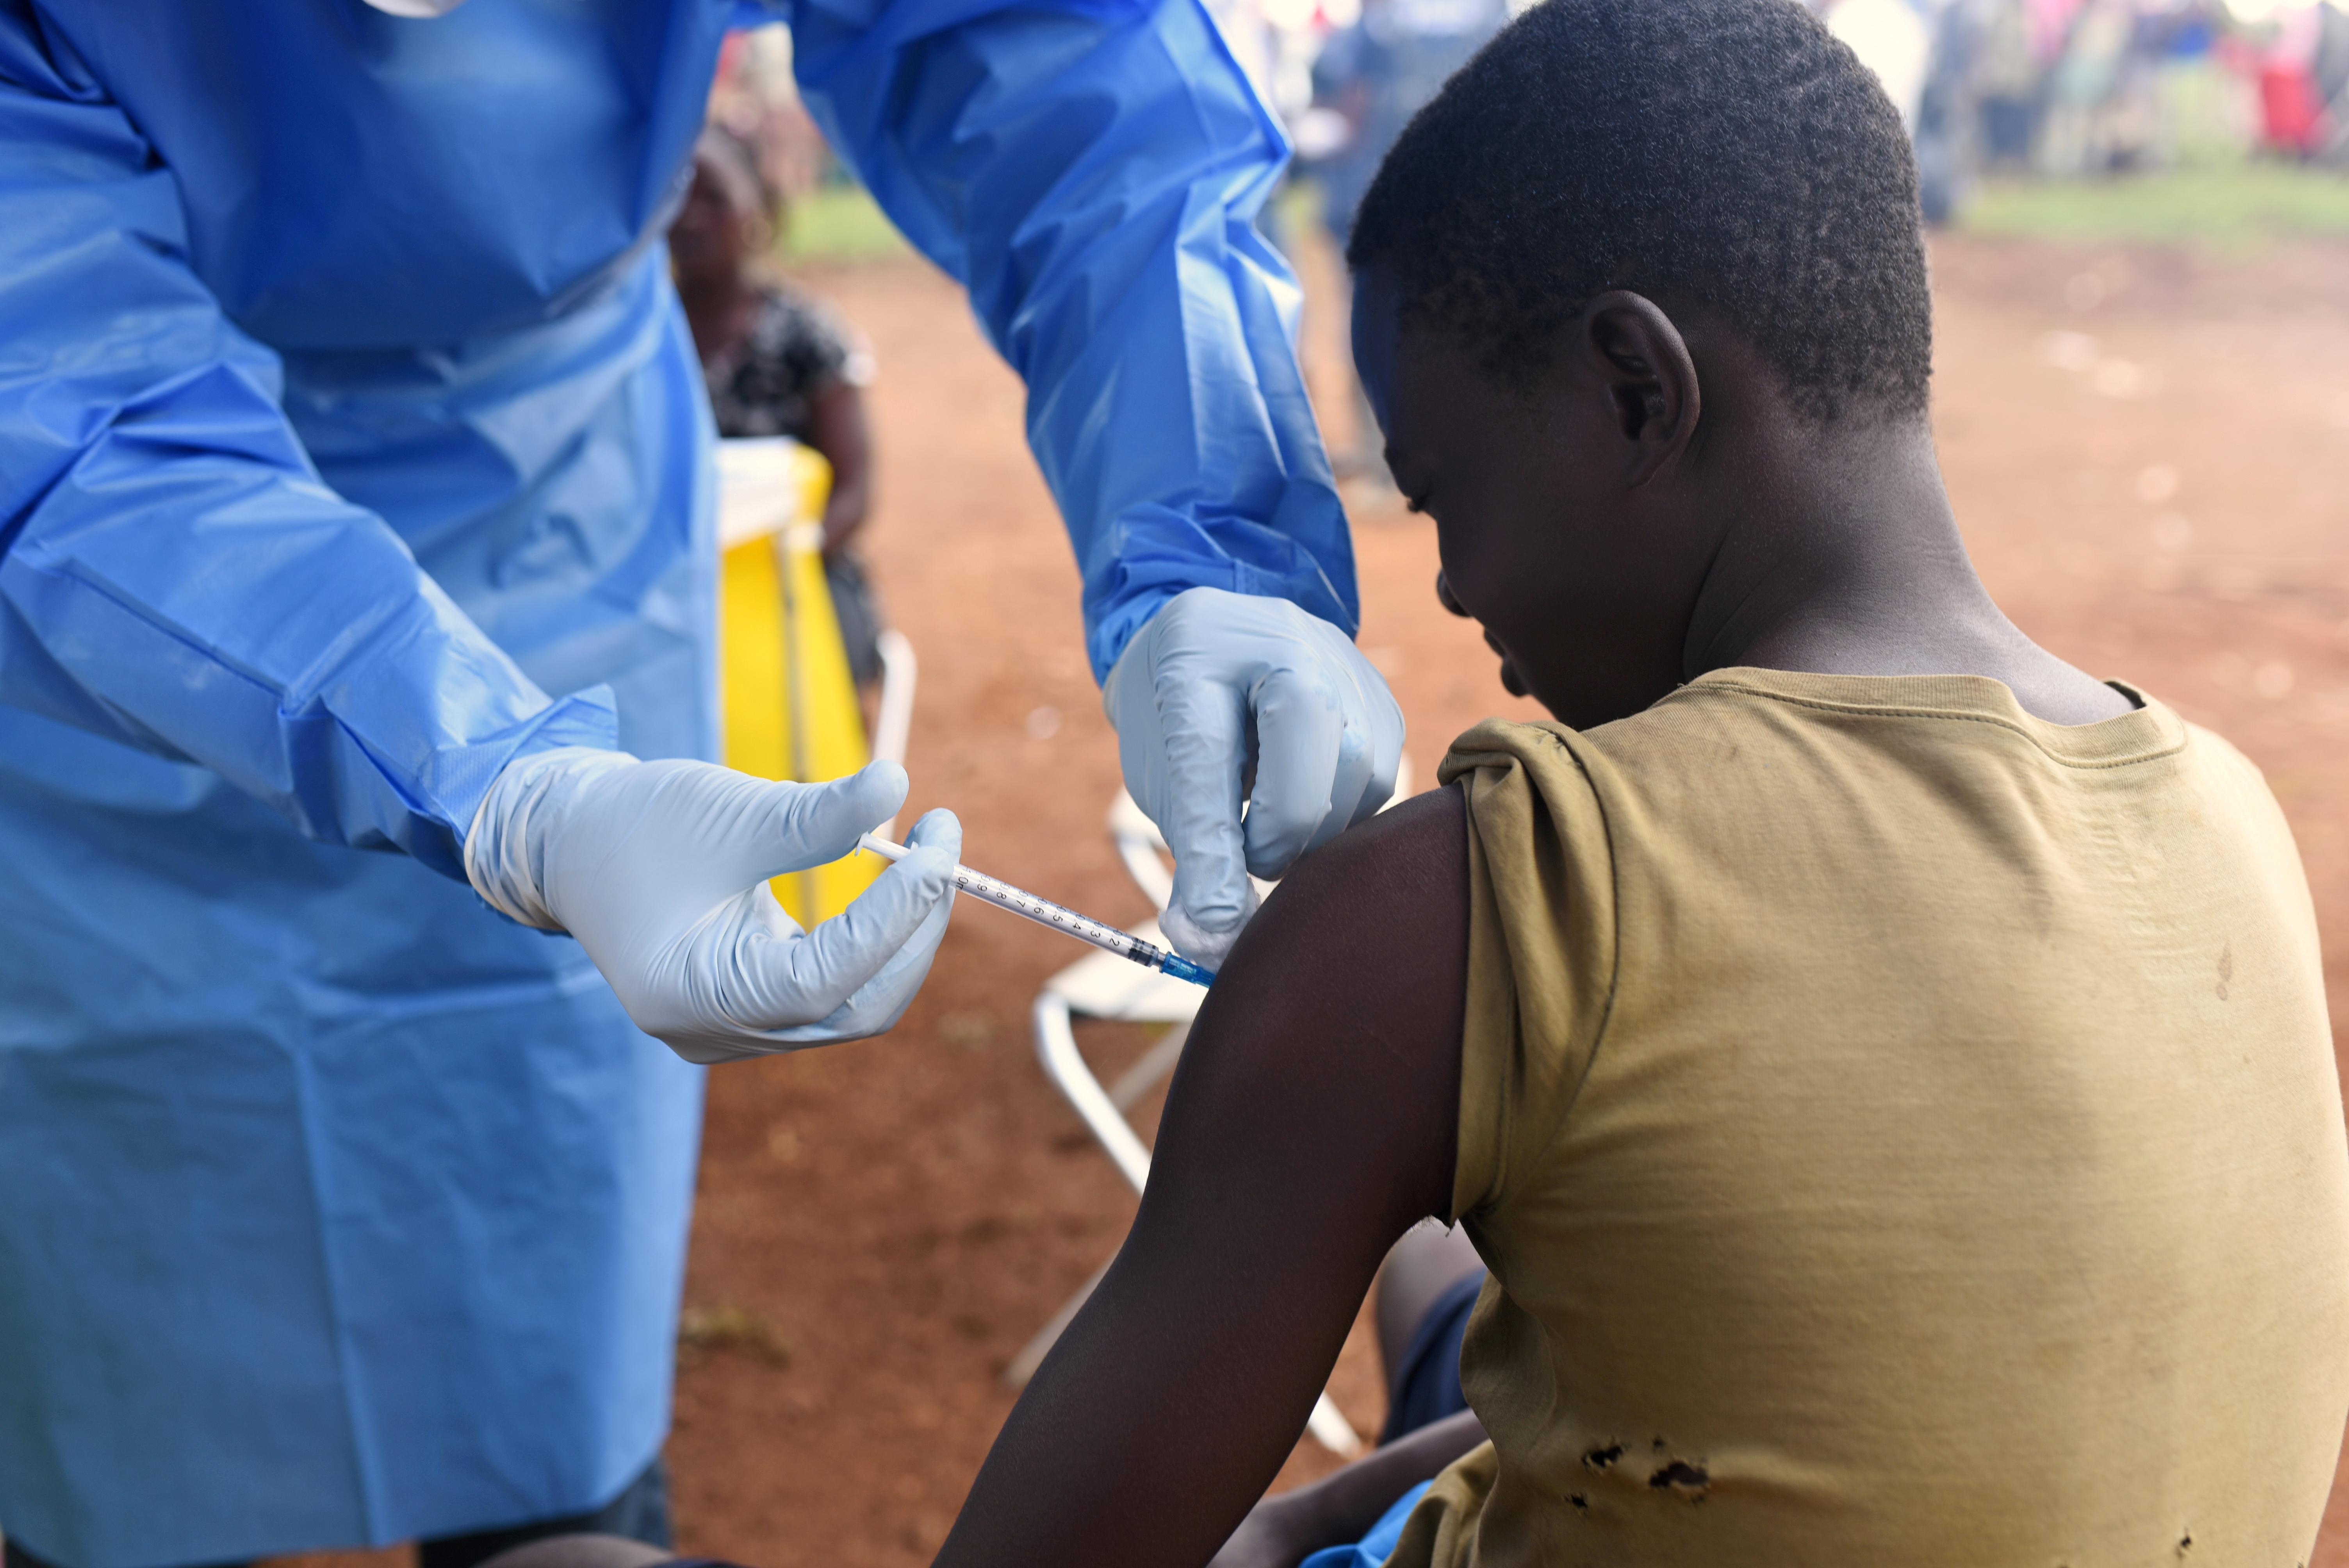 A Congolese health worker administers Ebola vaccine to a boy who had contact with an Ebola sufferer in the village of Mangina